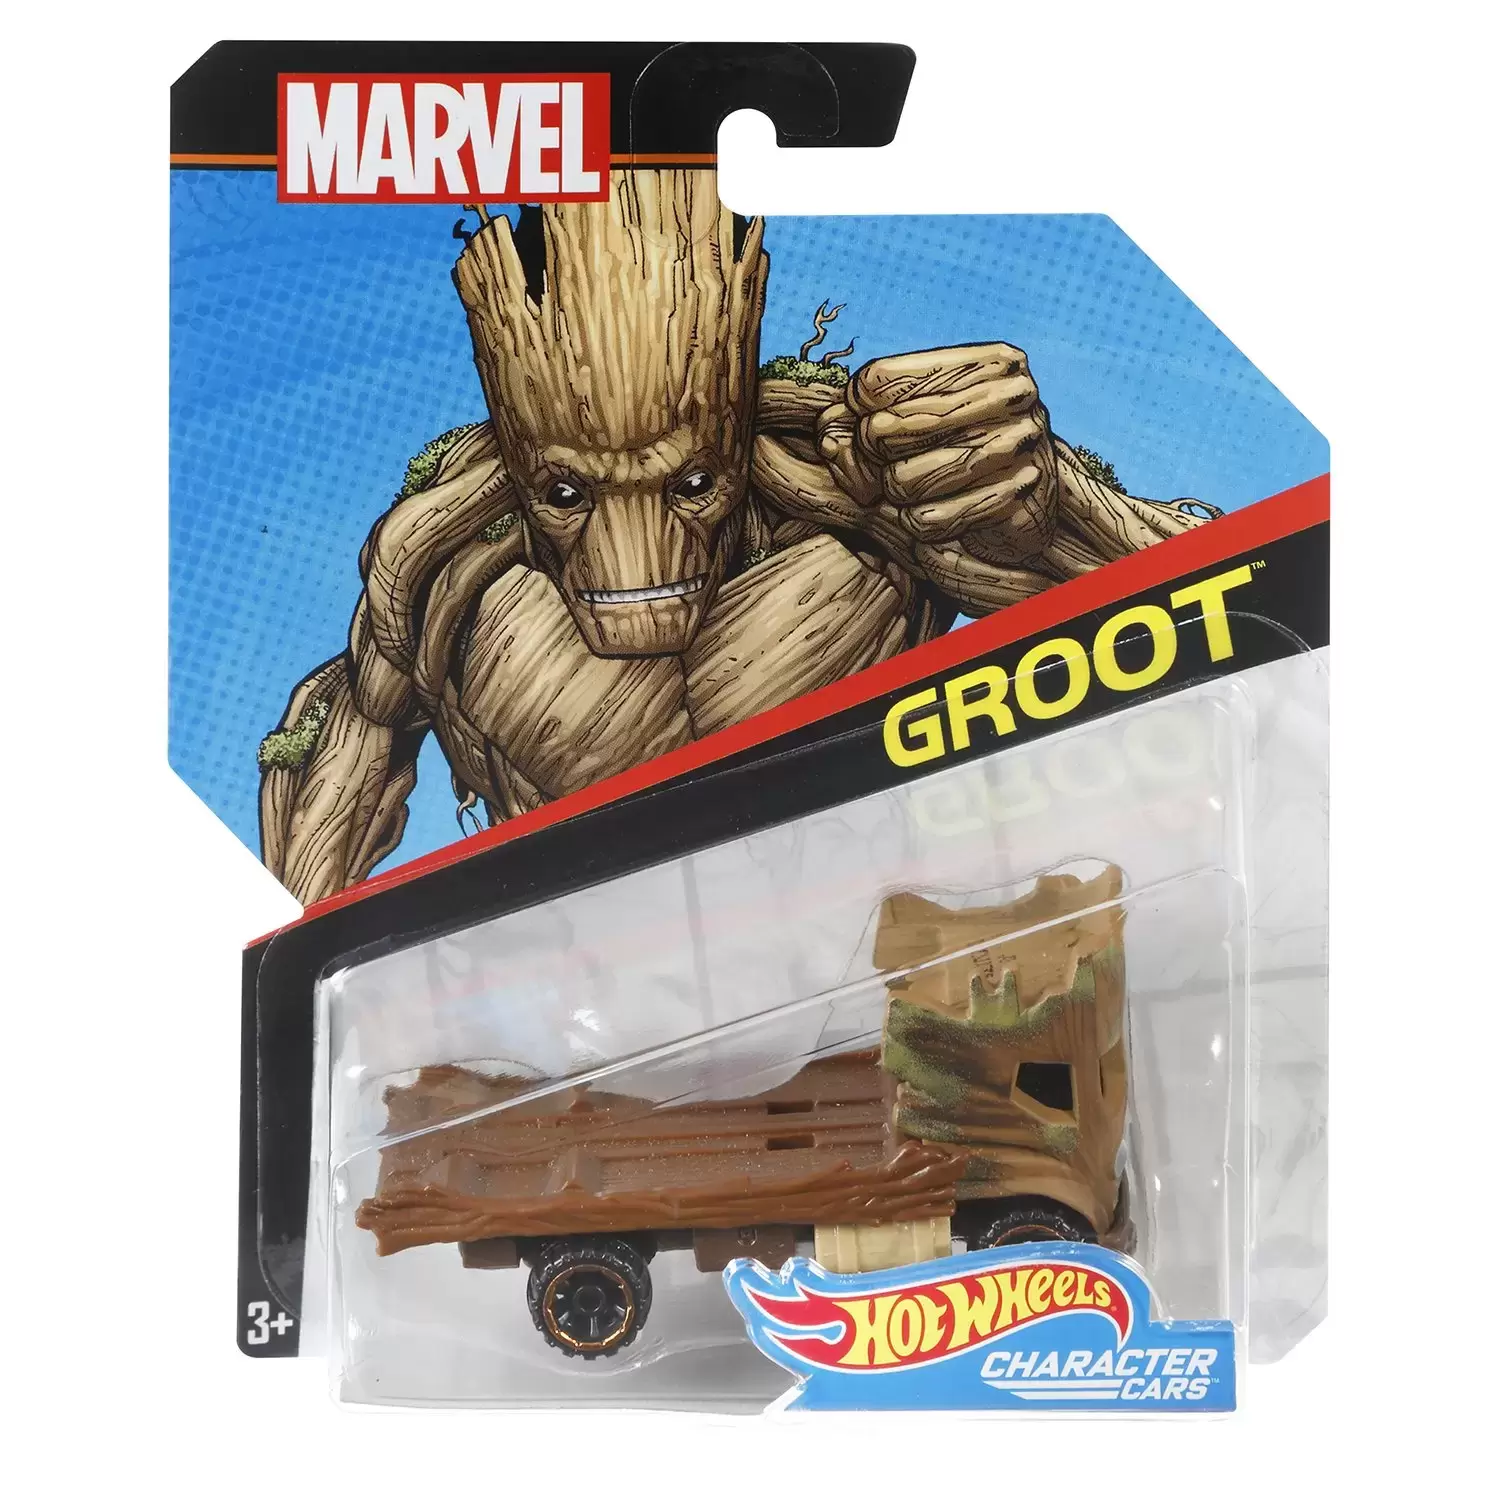 Marvel Character Cars - Groot